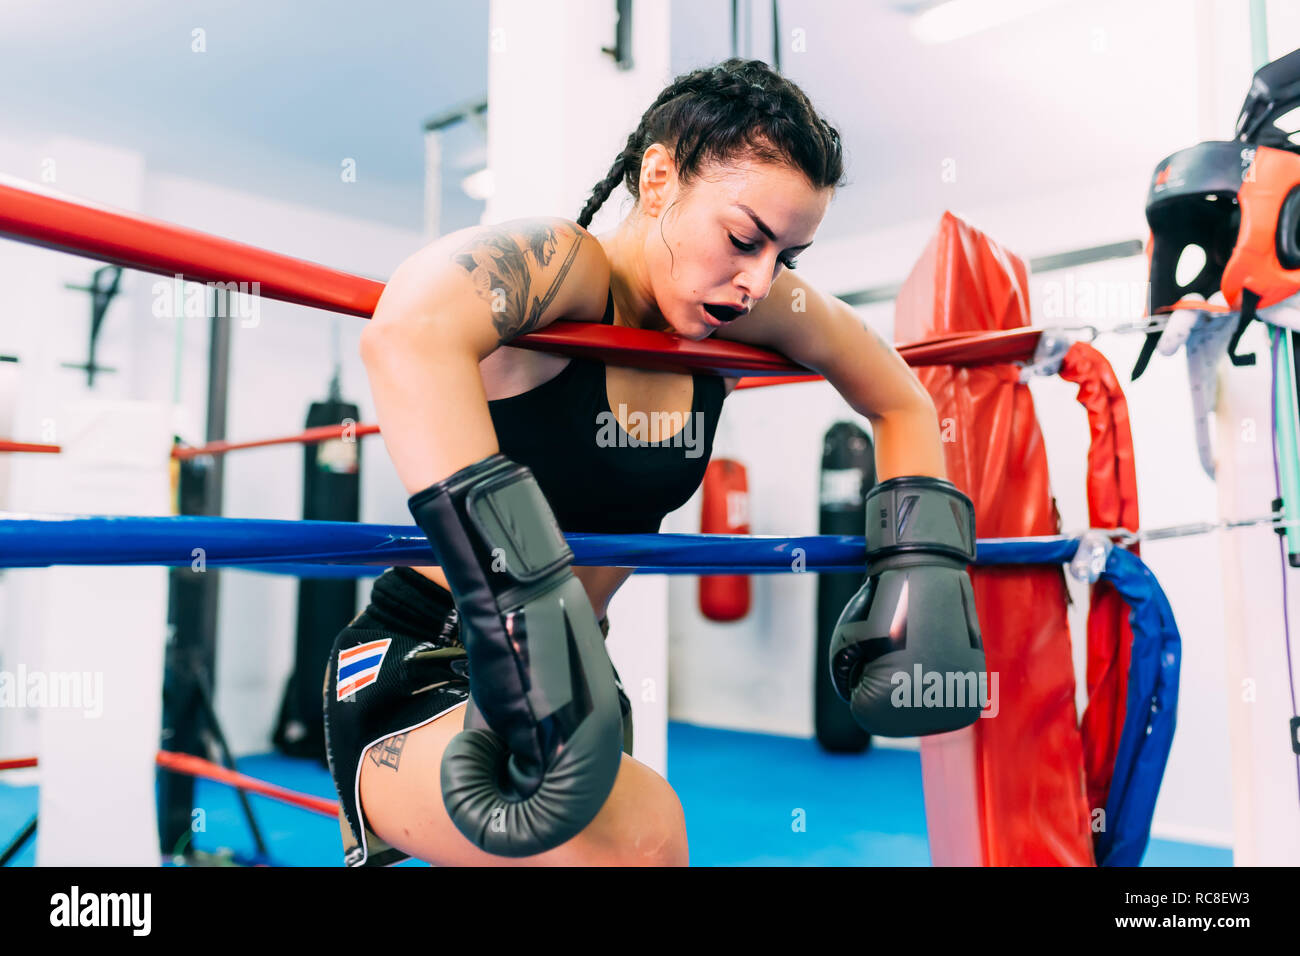 Exhausted female boxer leaning over boxing ring ropes Stock Photo